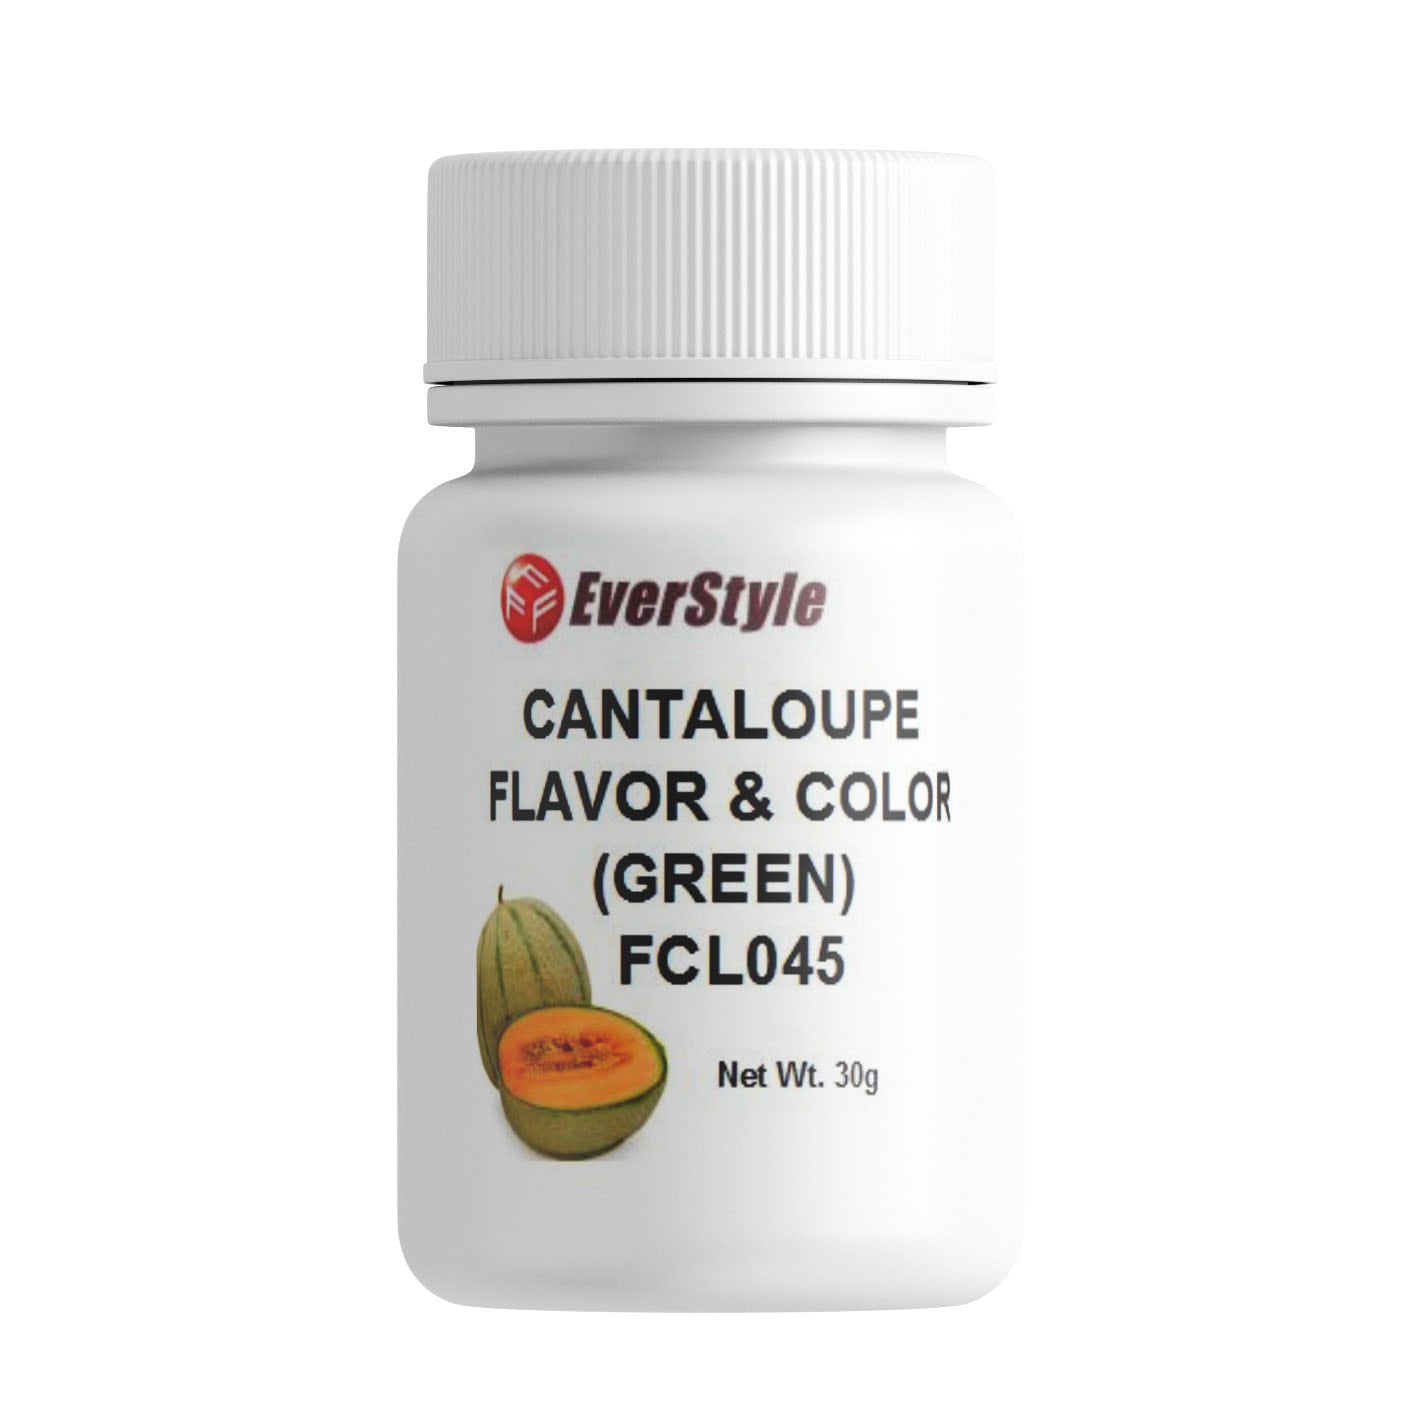 Everstyle Cantaloupe Flavor and Color Green 30g (FCL045)